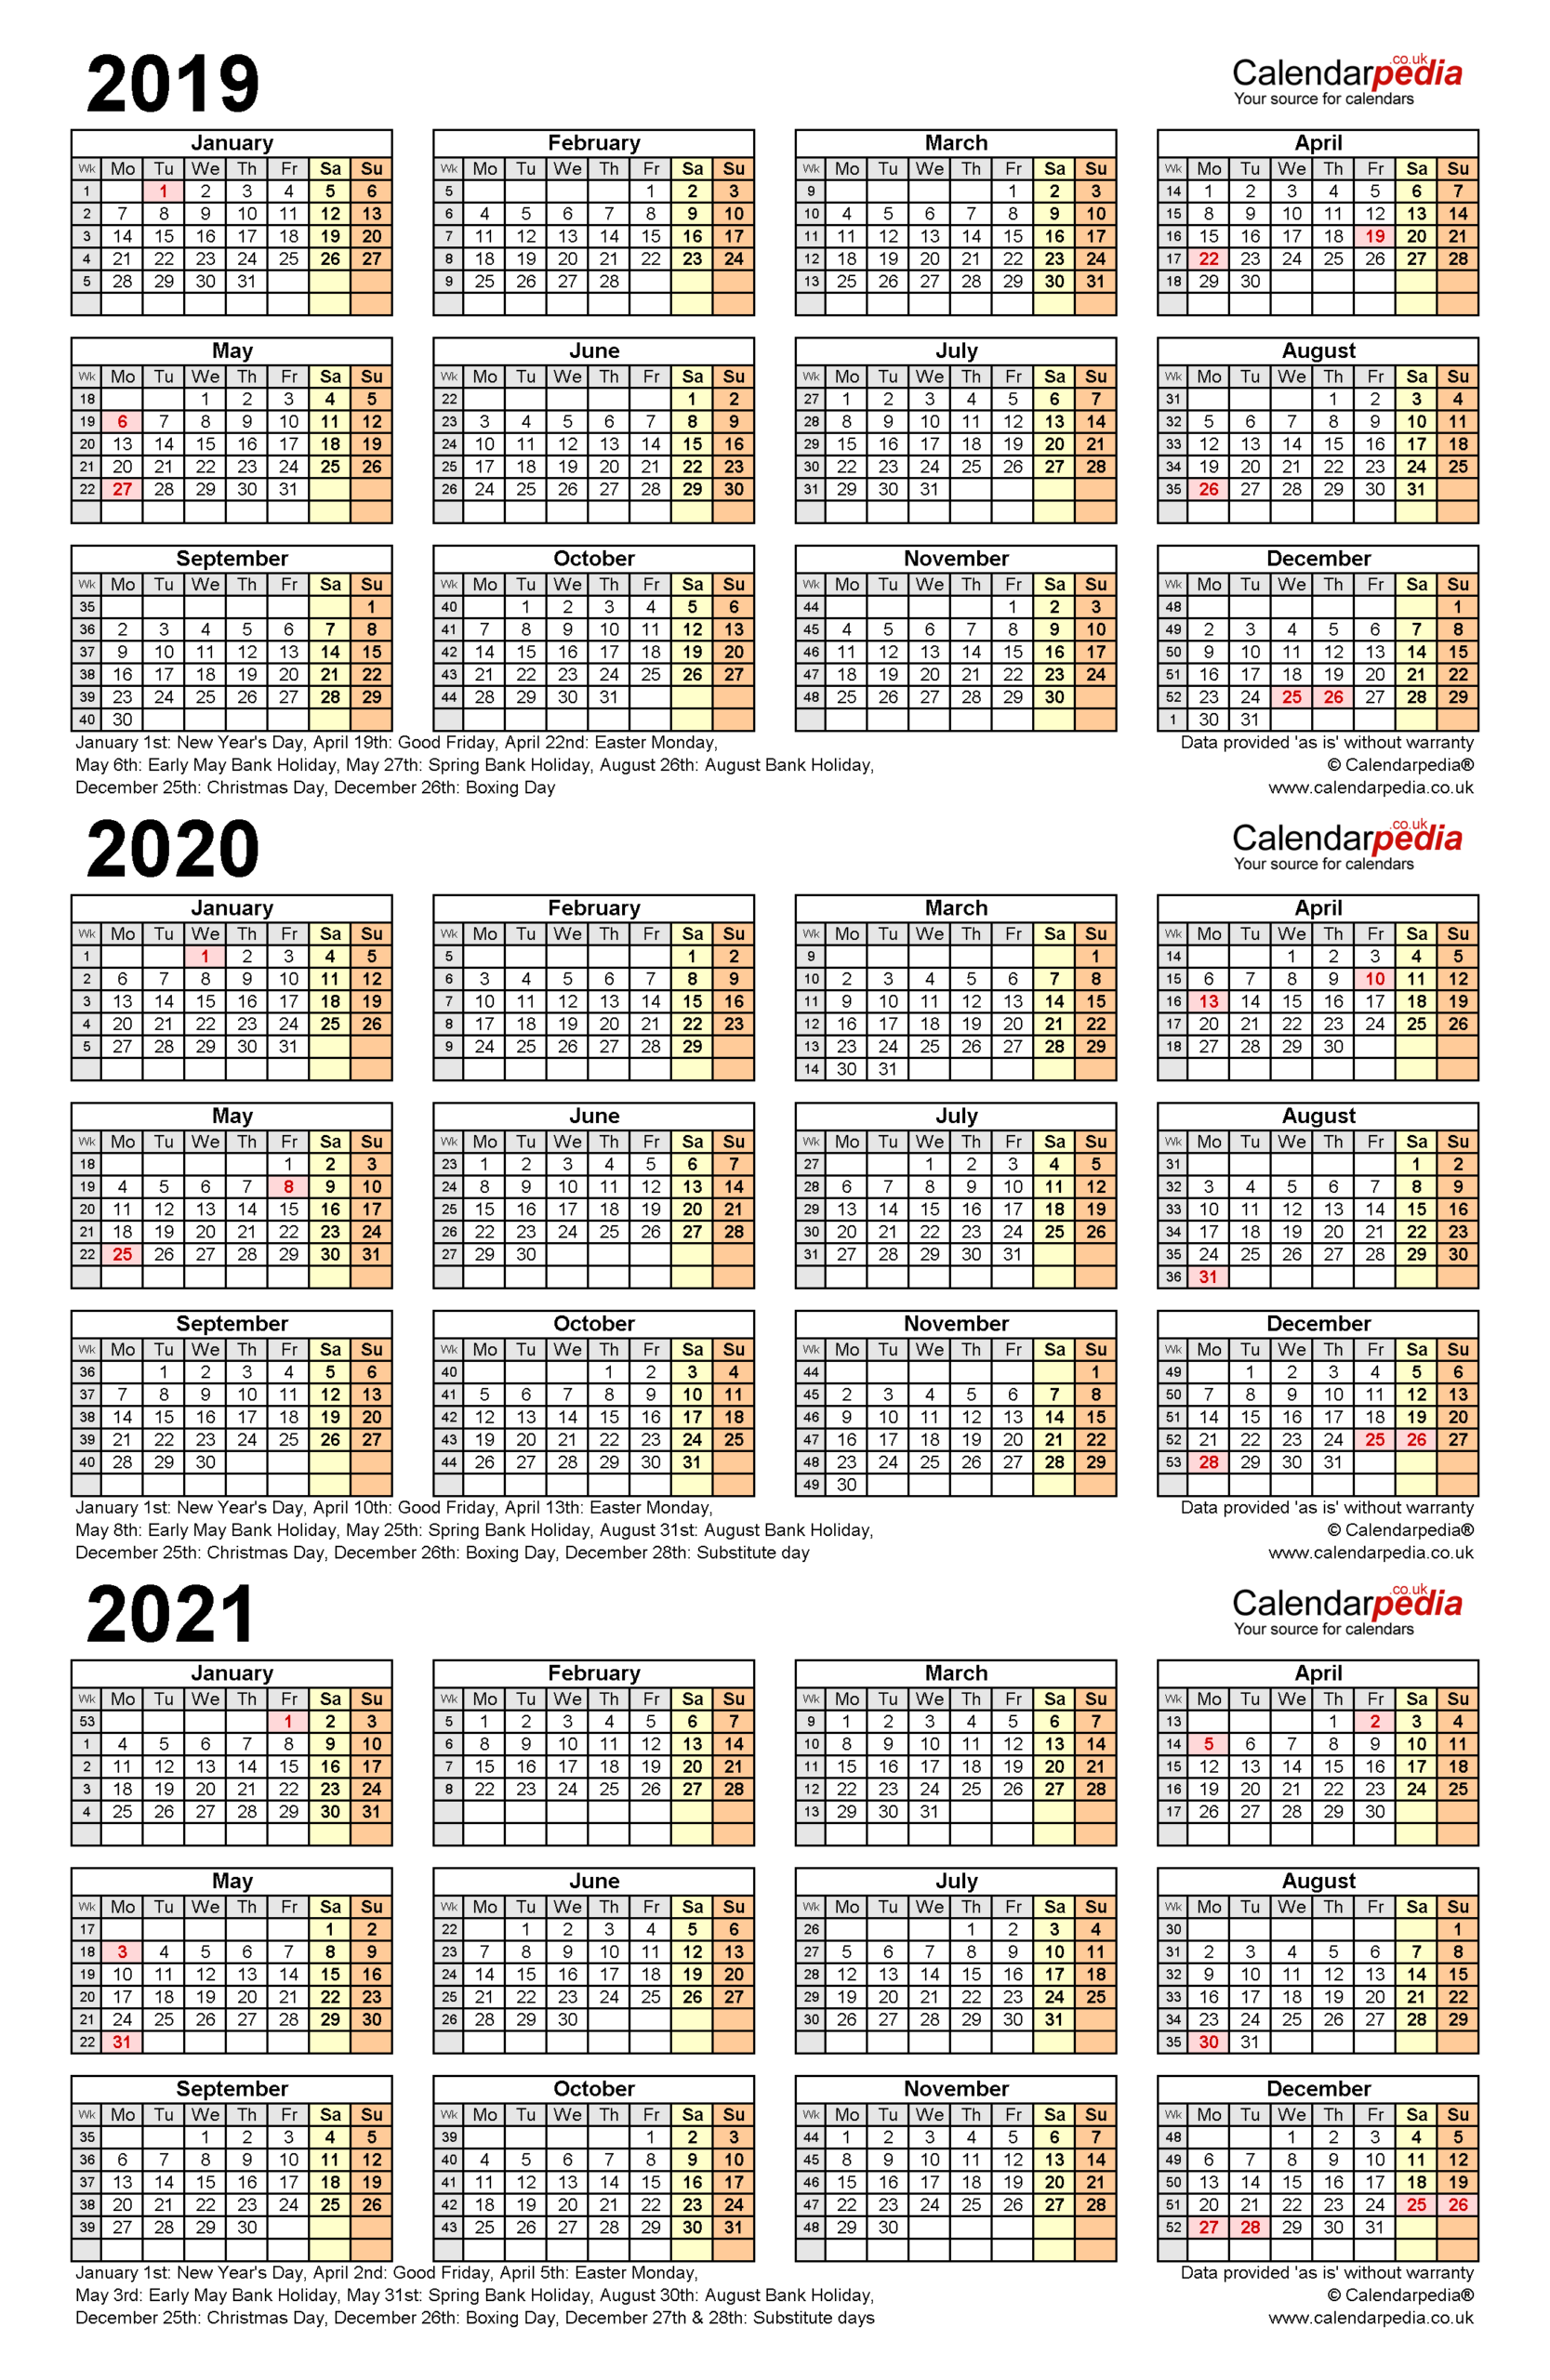 Three Year Calendars For 2019, 2020 &amp; 2021 (Uk) For Pdf